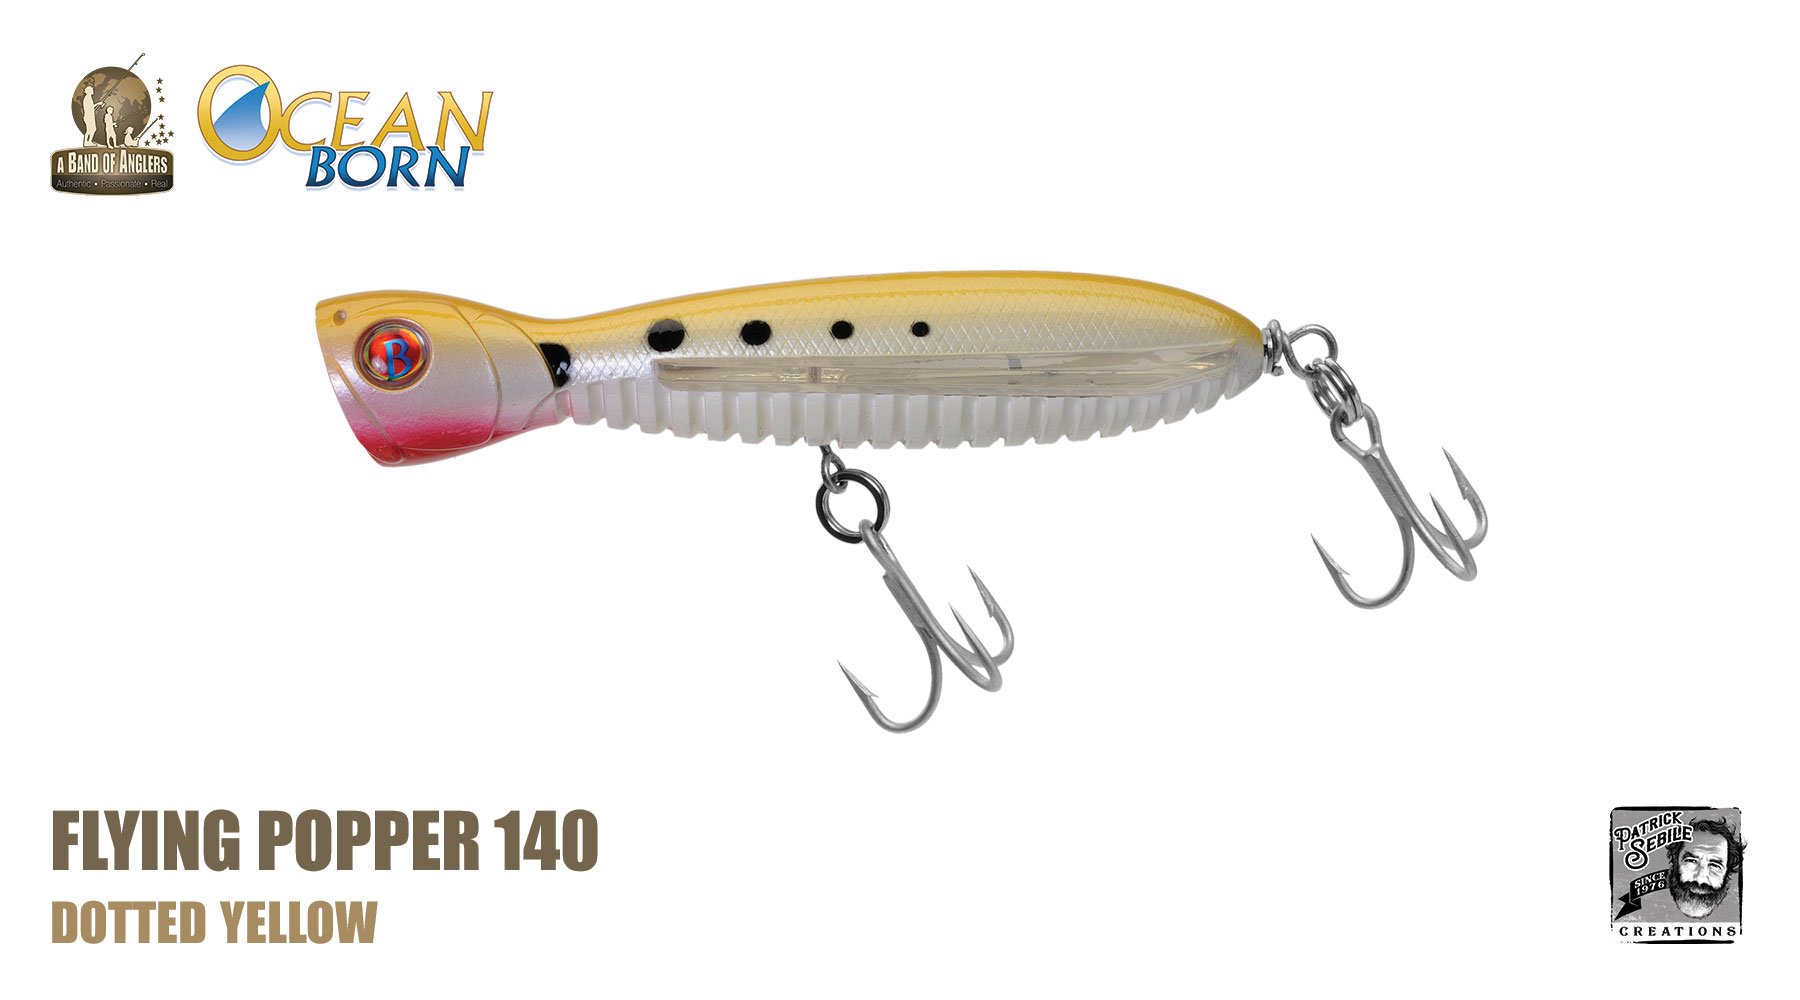 Ocean Born Flying Popper 140 Floating - Dotted Yellow